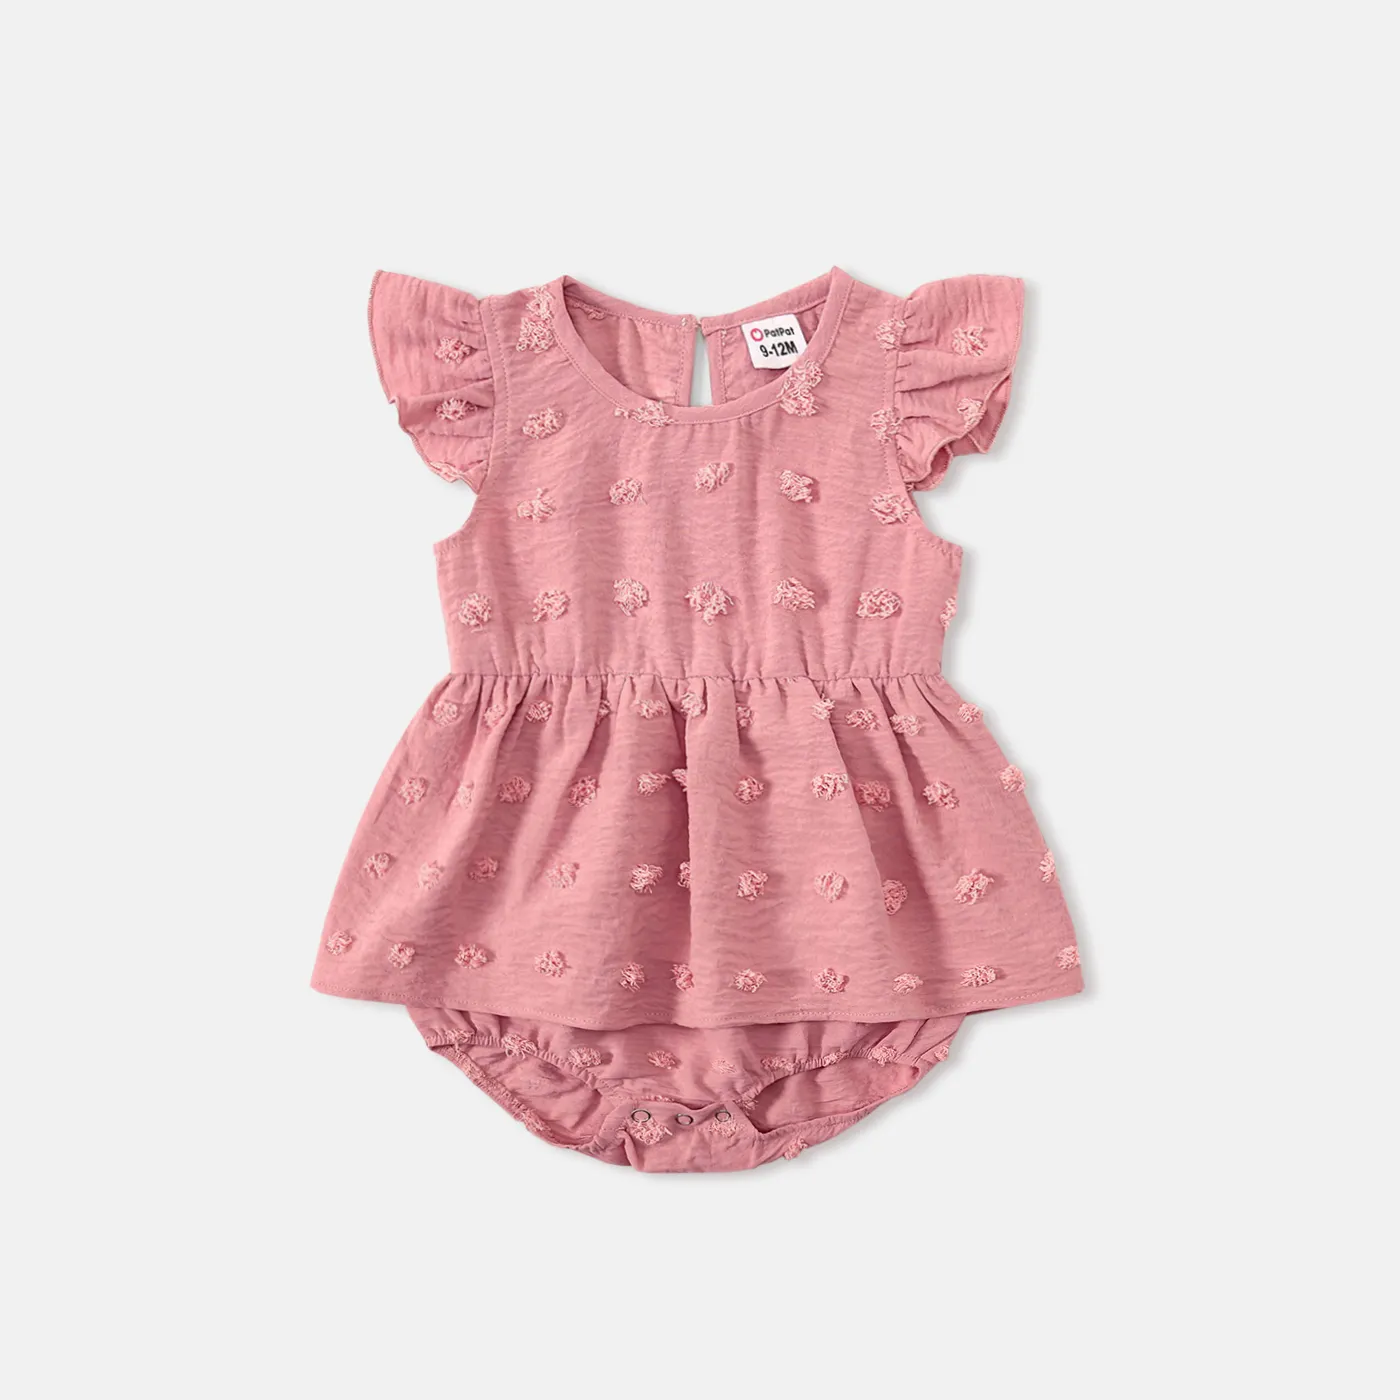 Family Matching Cotton Short-sleeve T-shirts and Pink Swiss Dot Lace Detail Flutter-sleeve Dresses S